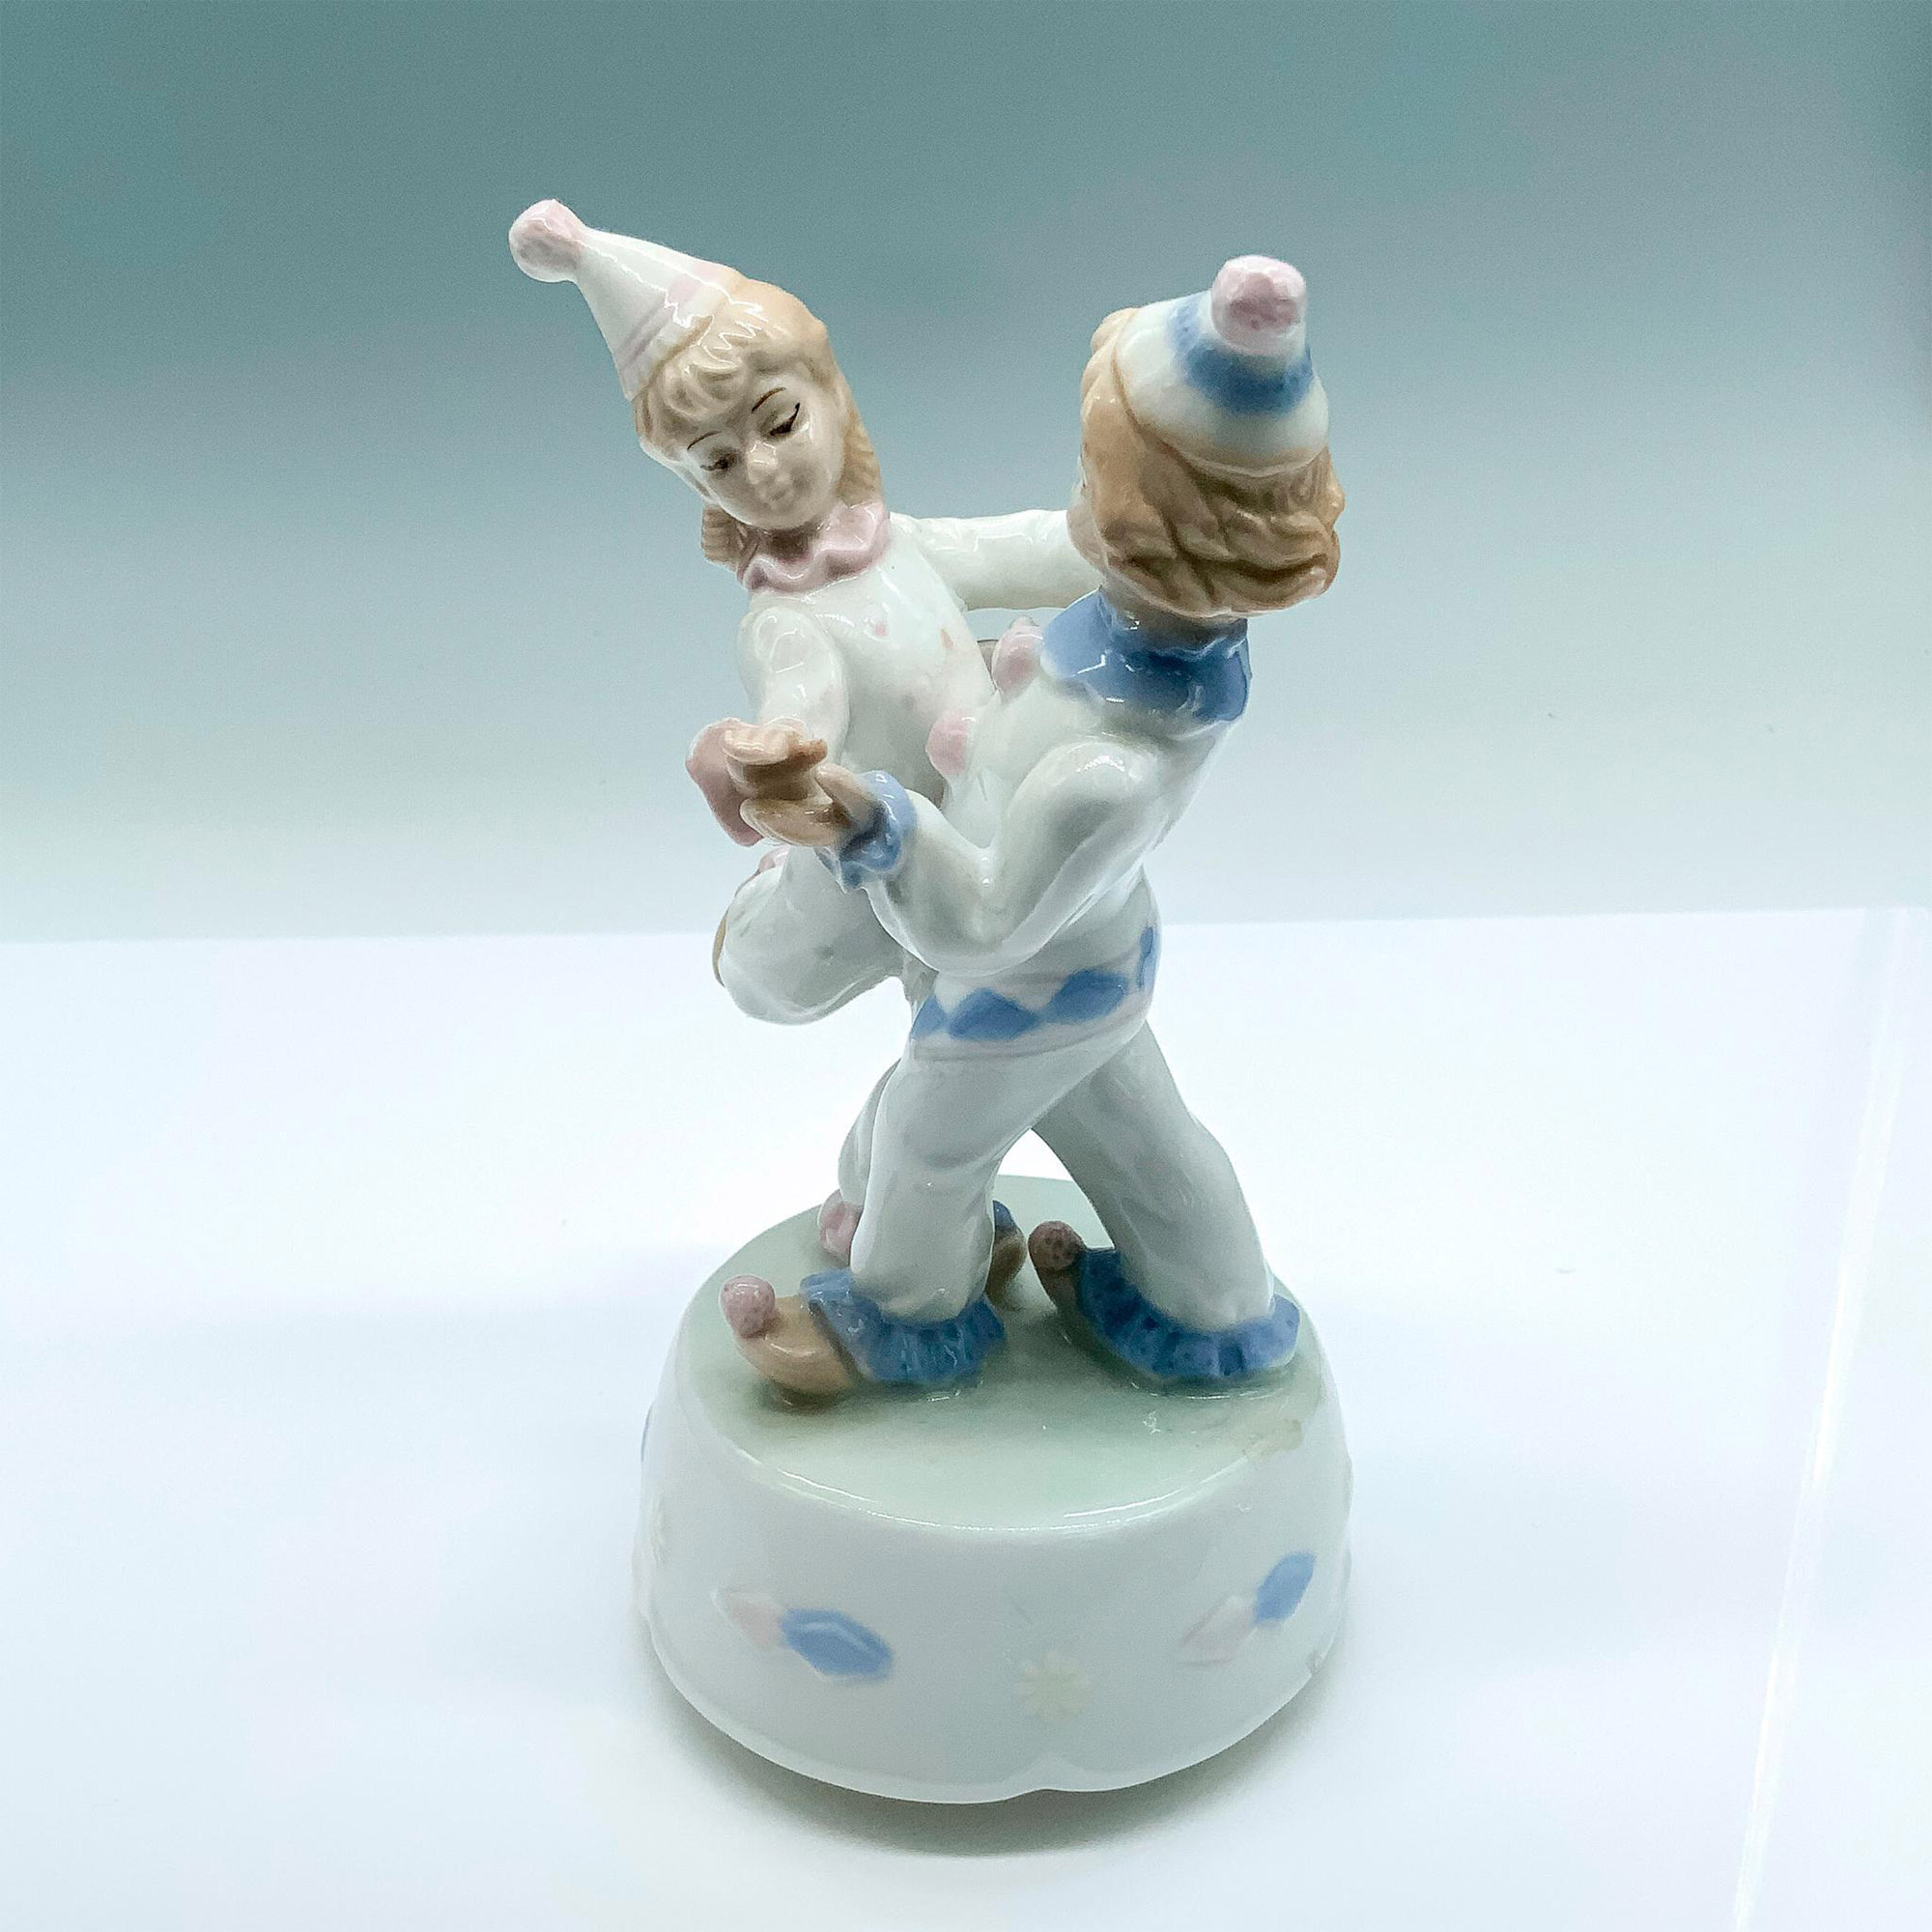 Meico Porcelain Dancing Clowns Music Box - Image 3 of 4